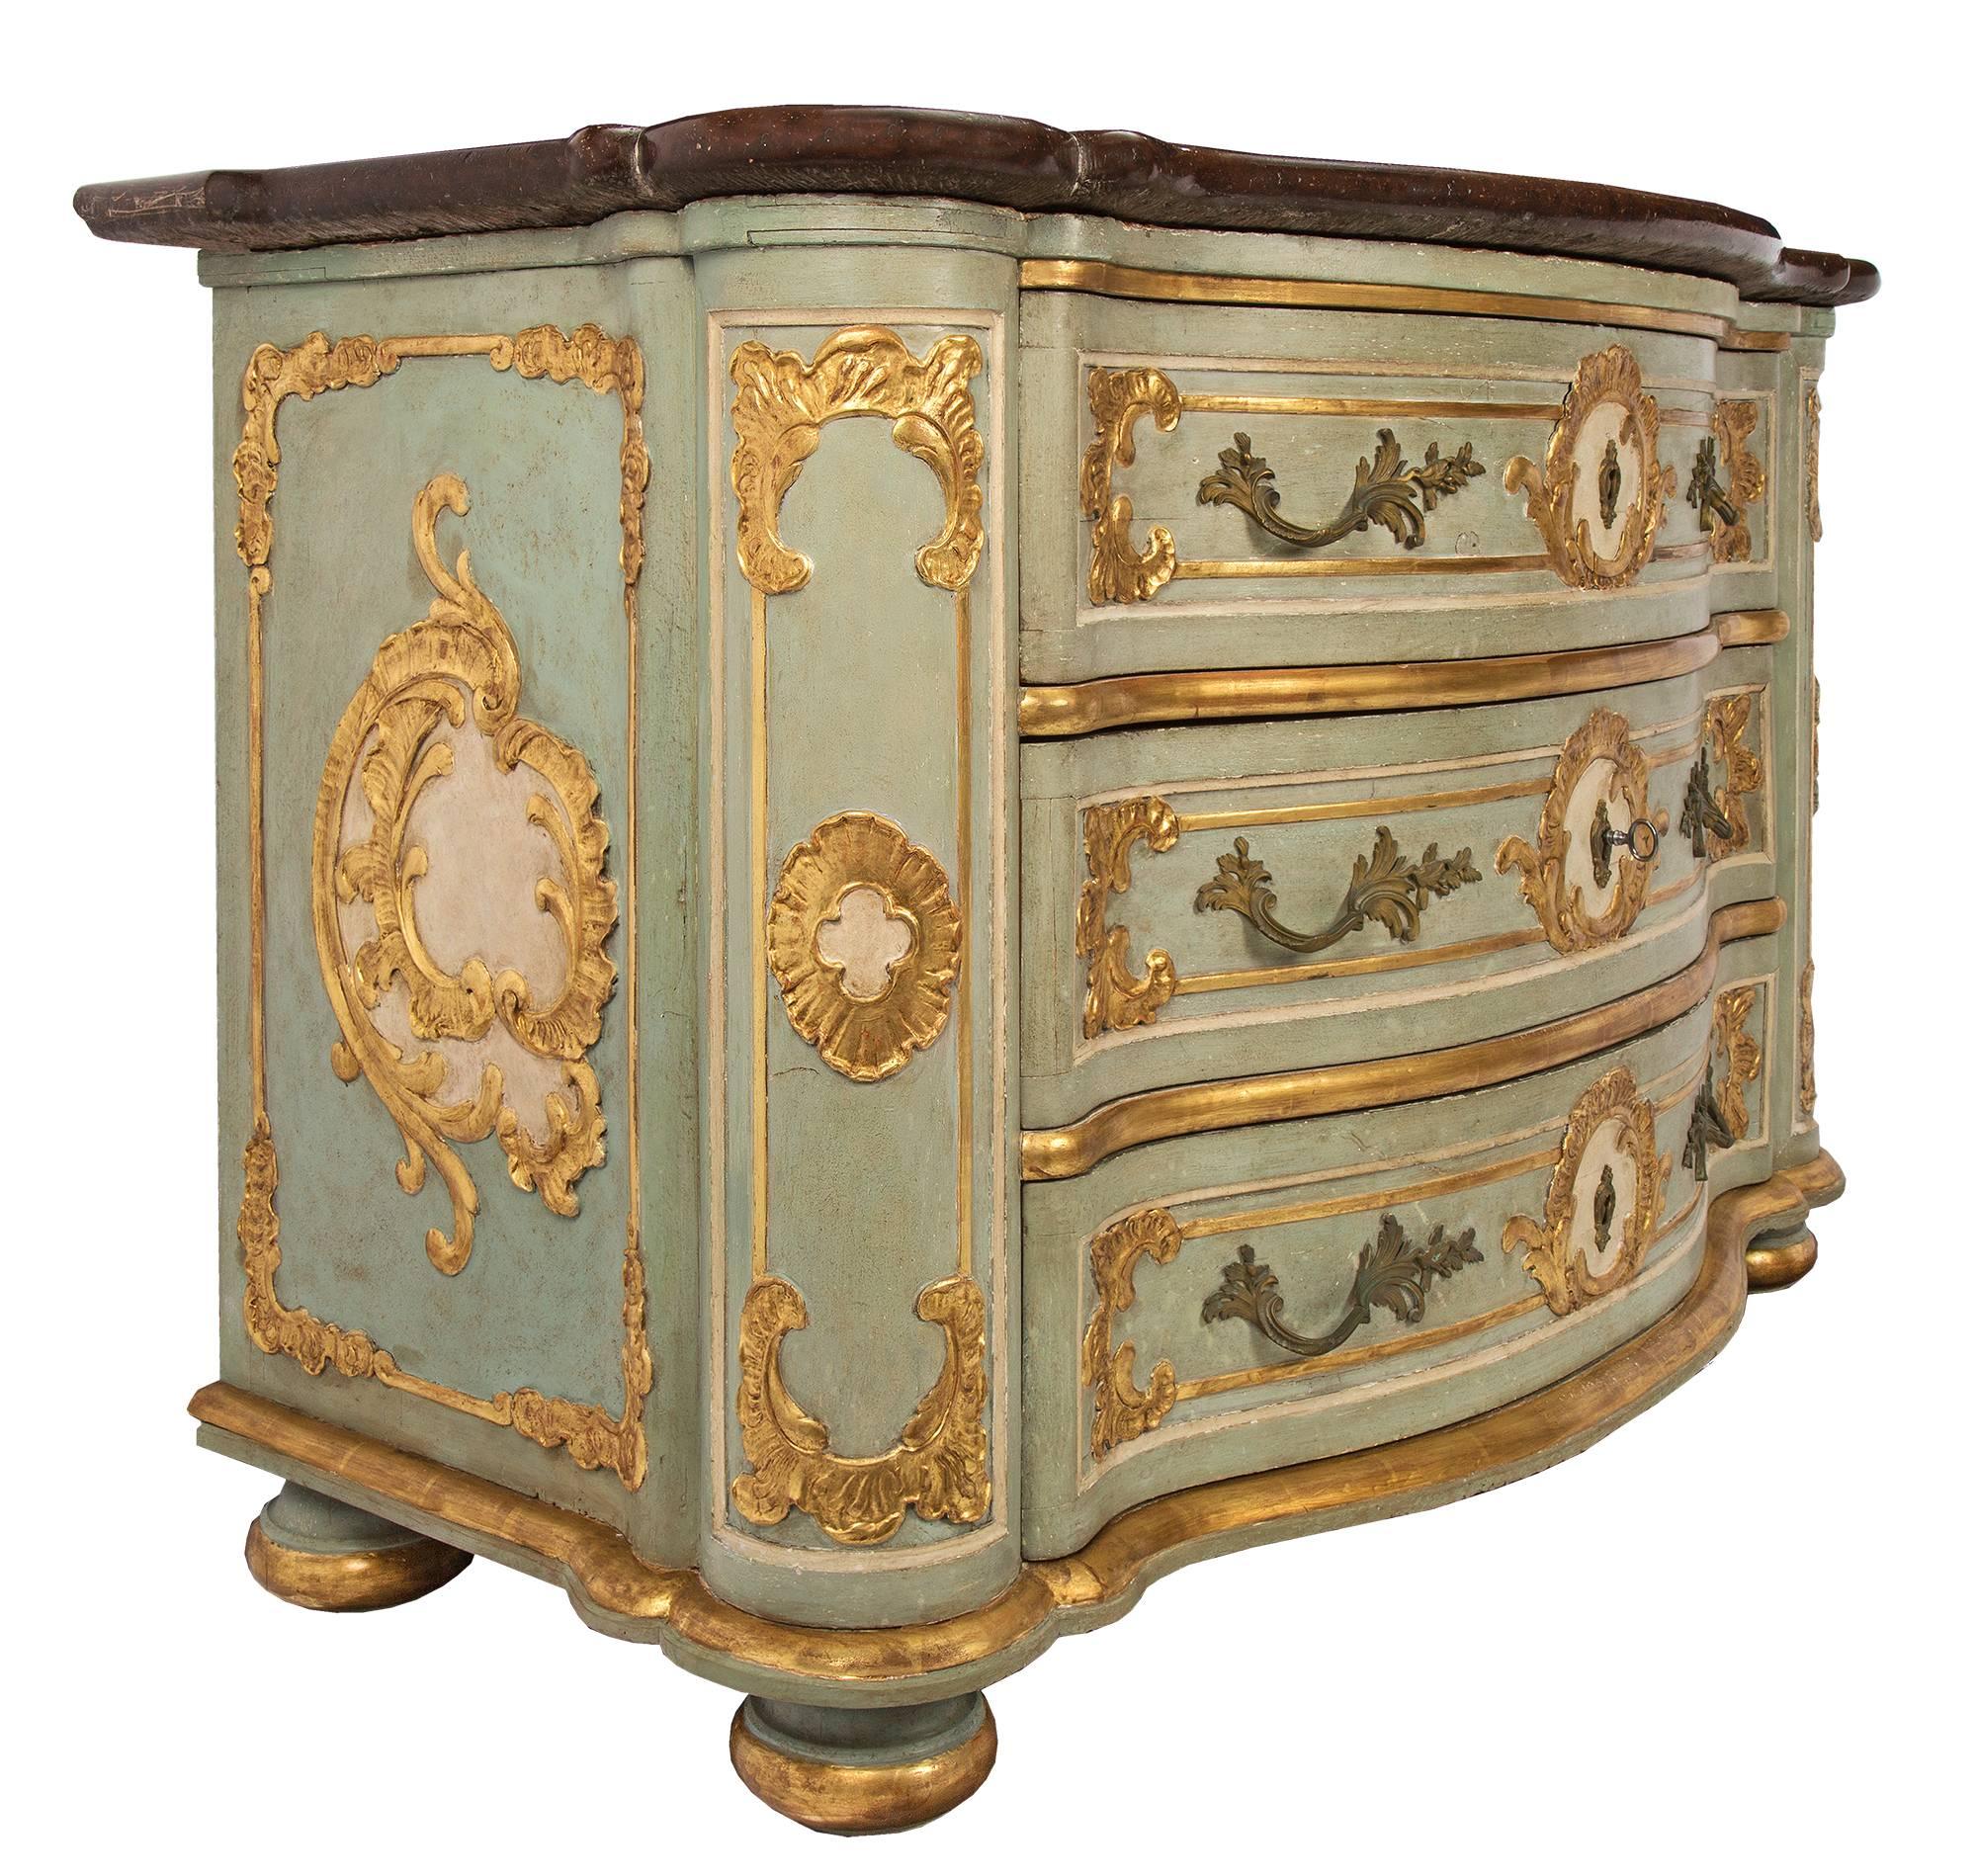 A sensational Italian mid-18th century Louis XV Period three drawer patinated and giltwood Venetian chest. The chest is raised by patinated bun feet with a giltwood band. Above the convex scalloped giltwood frieze are three richly decorated drawers